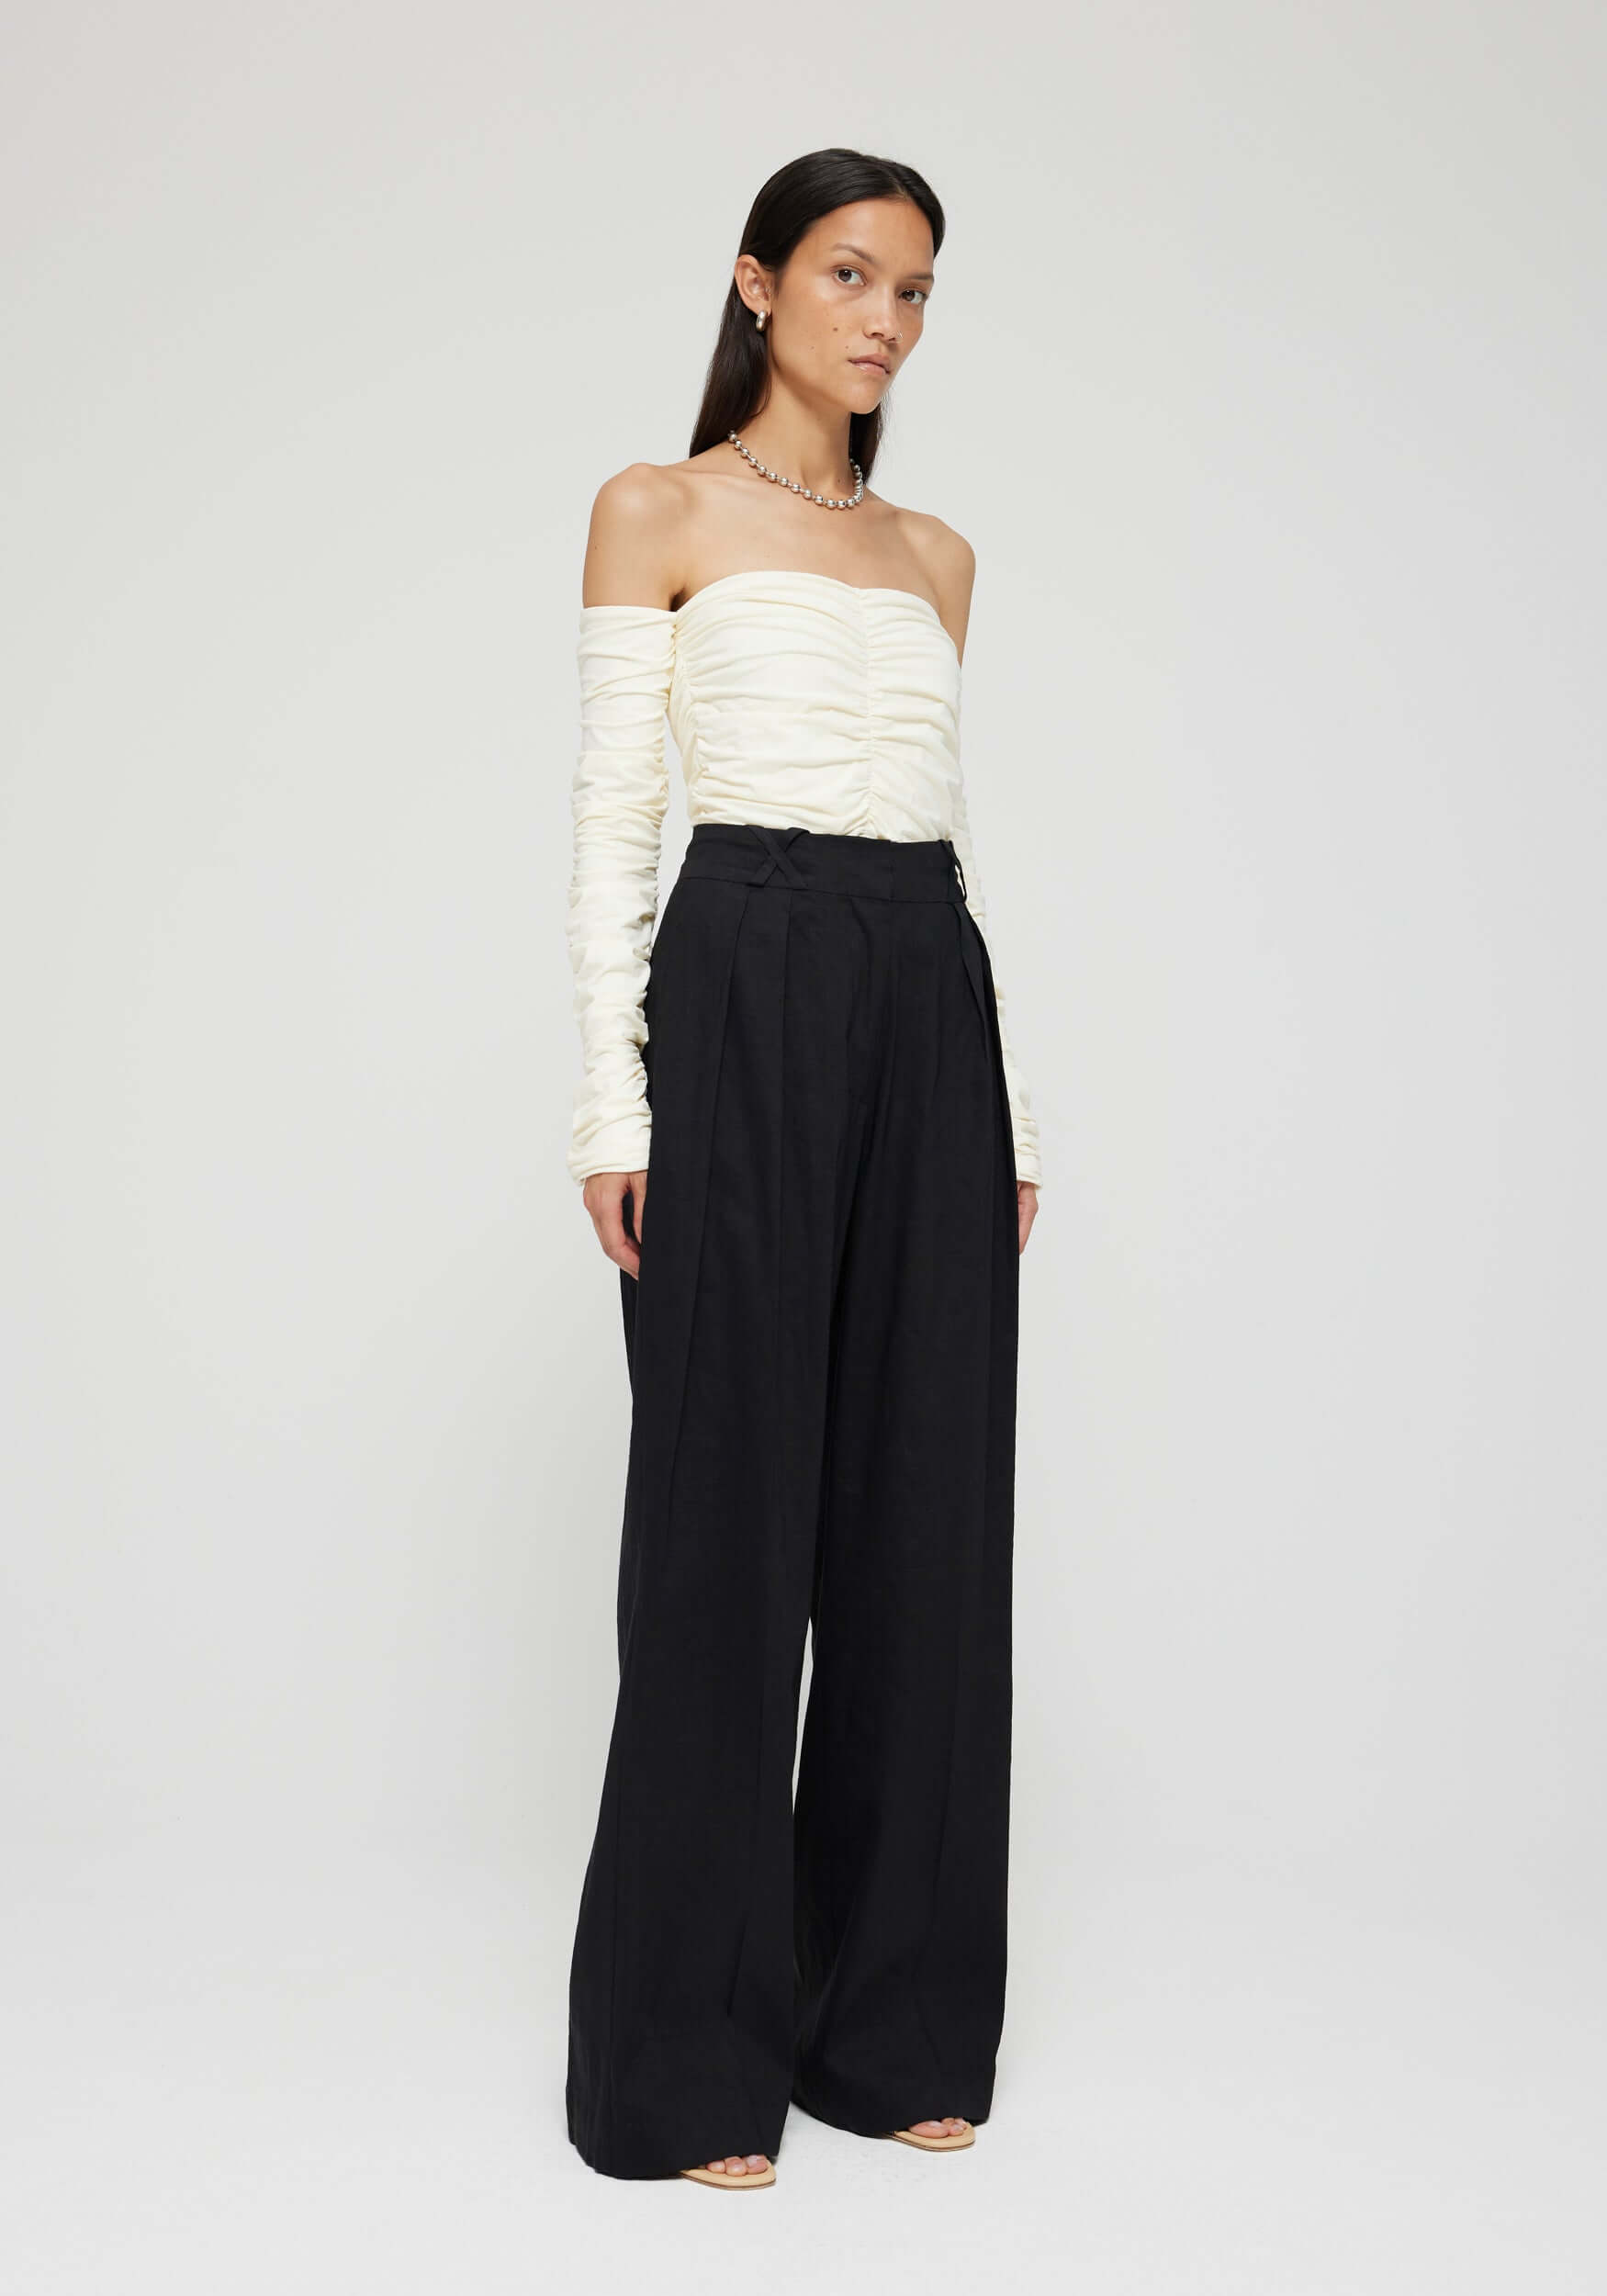 Rohe Smocked Off Shoulder Top in Off-White available at TNT The New Trend Australia. Free shipping on orders over $300 AUD.